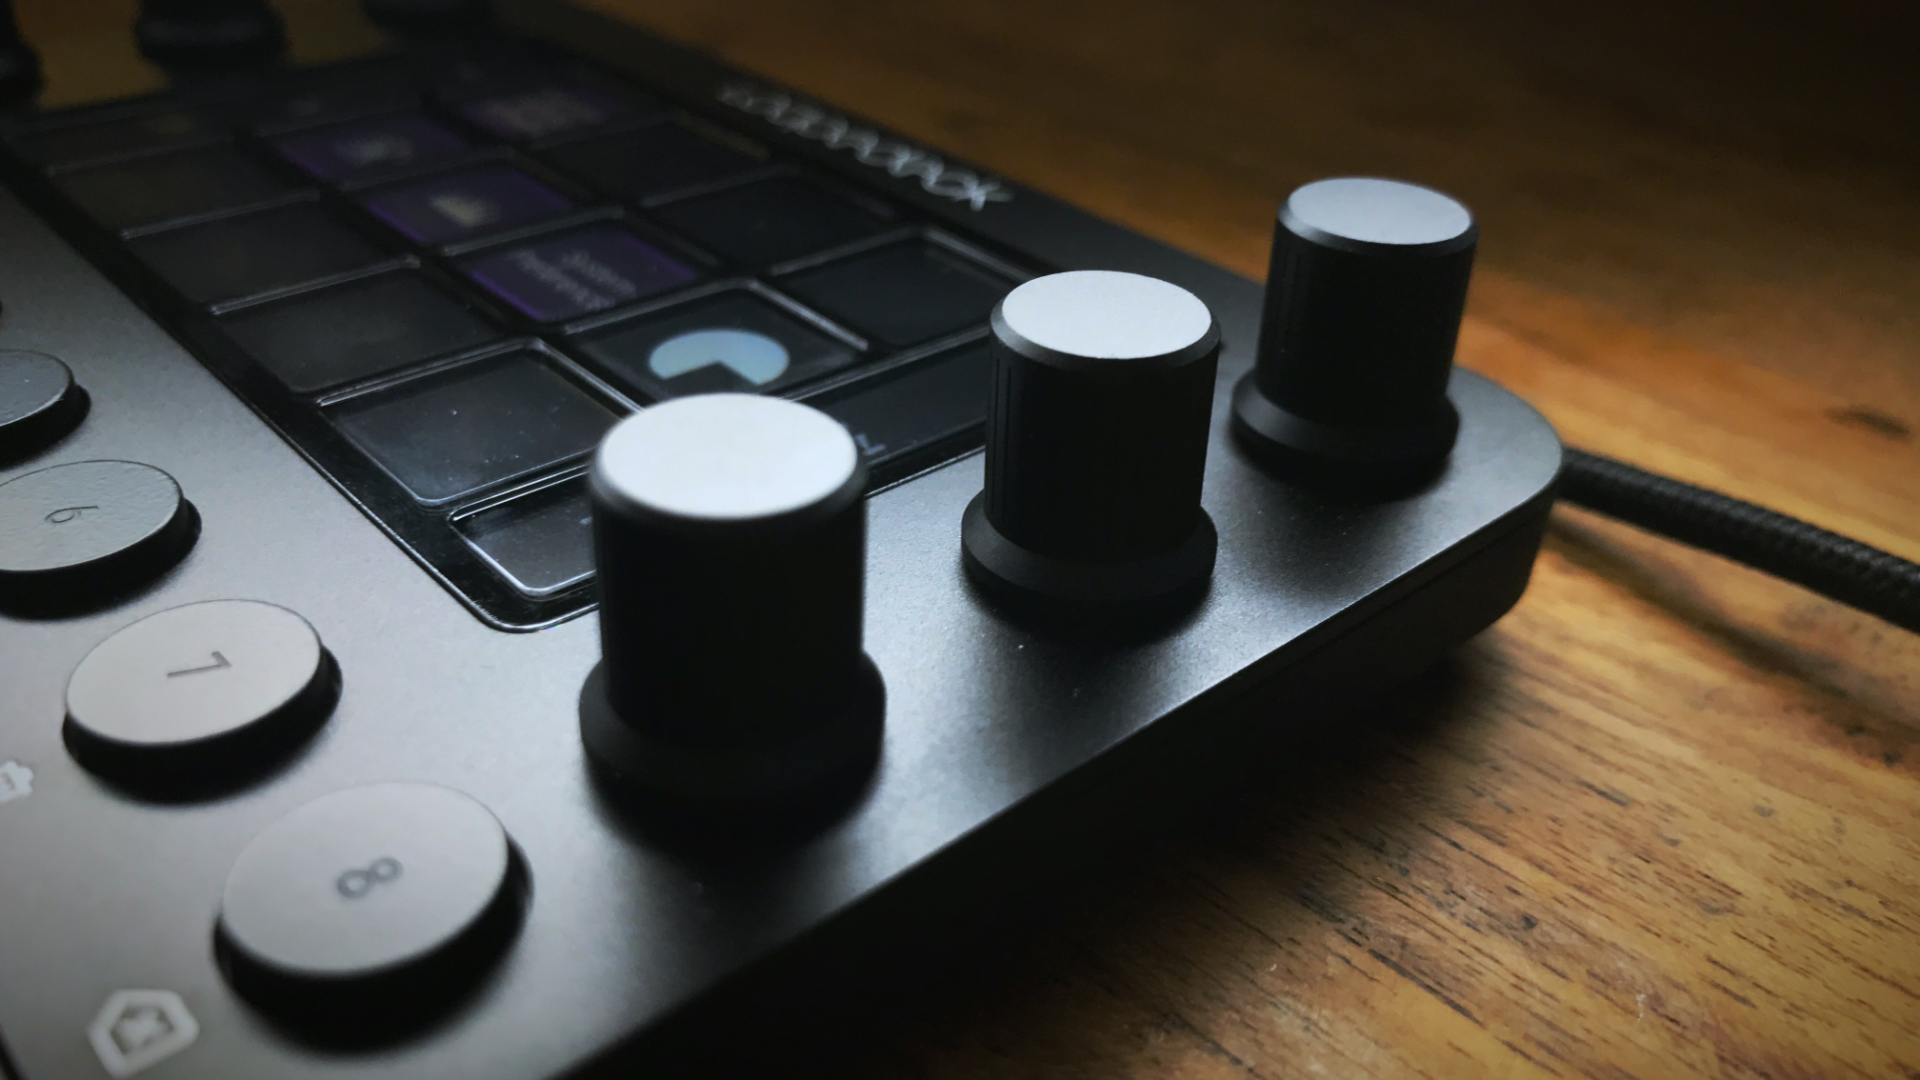 Loupedeck CT Review – New Tricks From an Already Versatile Control Panel